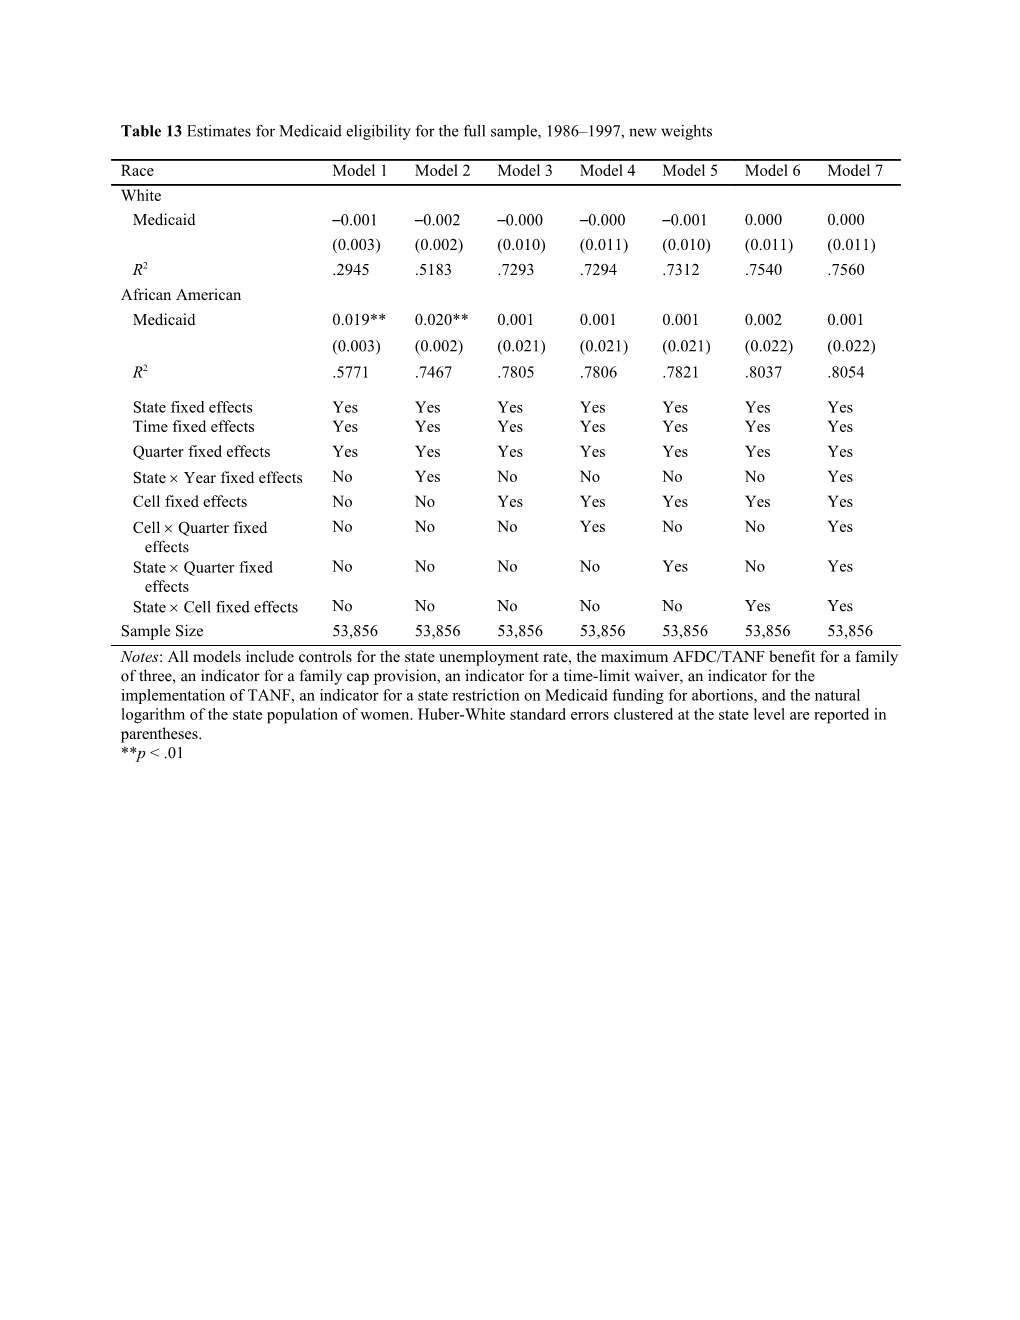 Table 13 Estimates for Medicaid Eligibility for the Full Sample, 1986 1997, New Weights